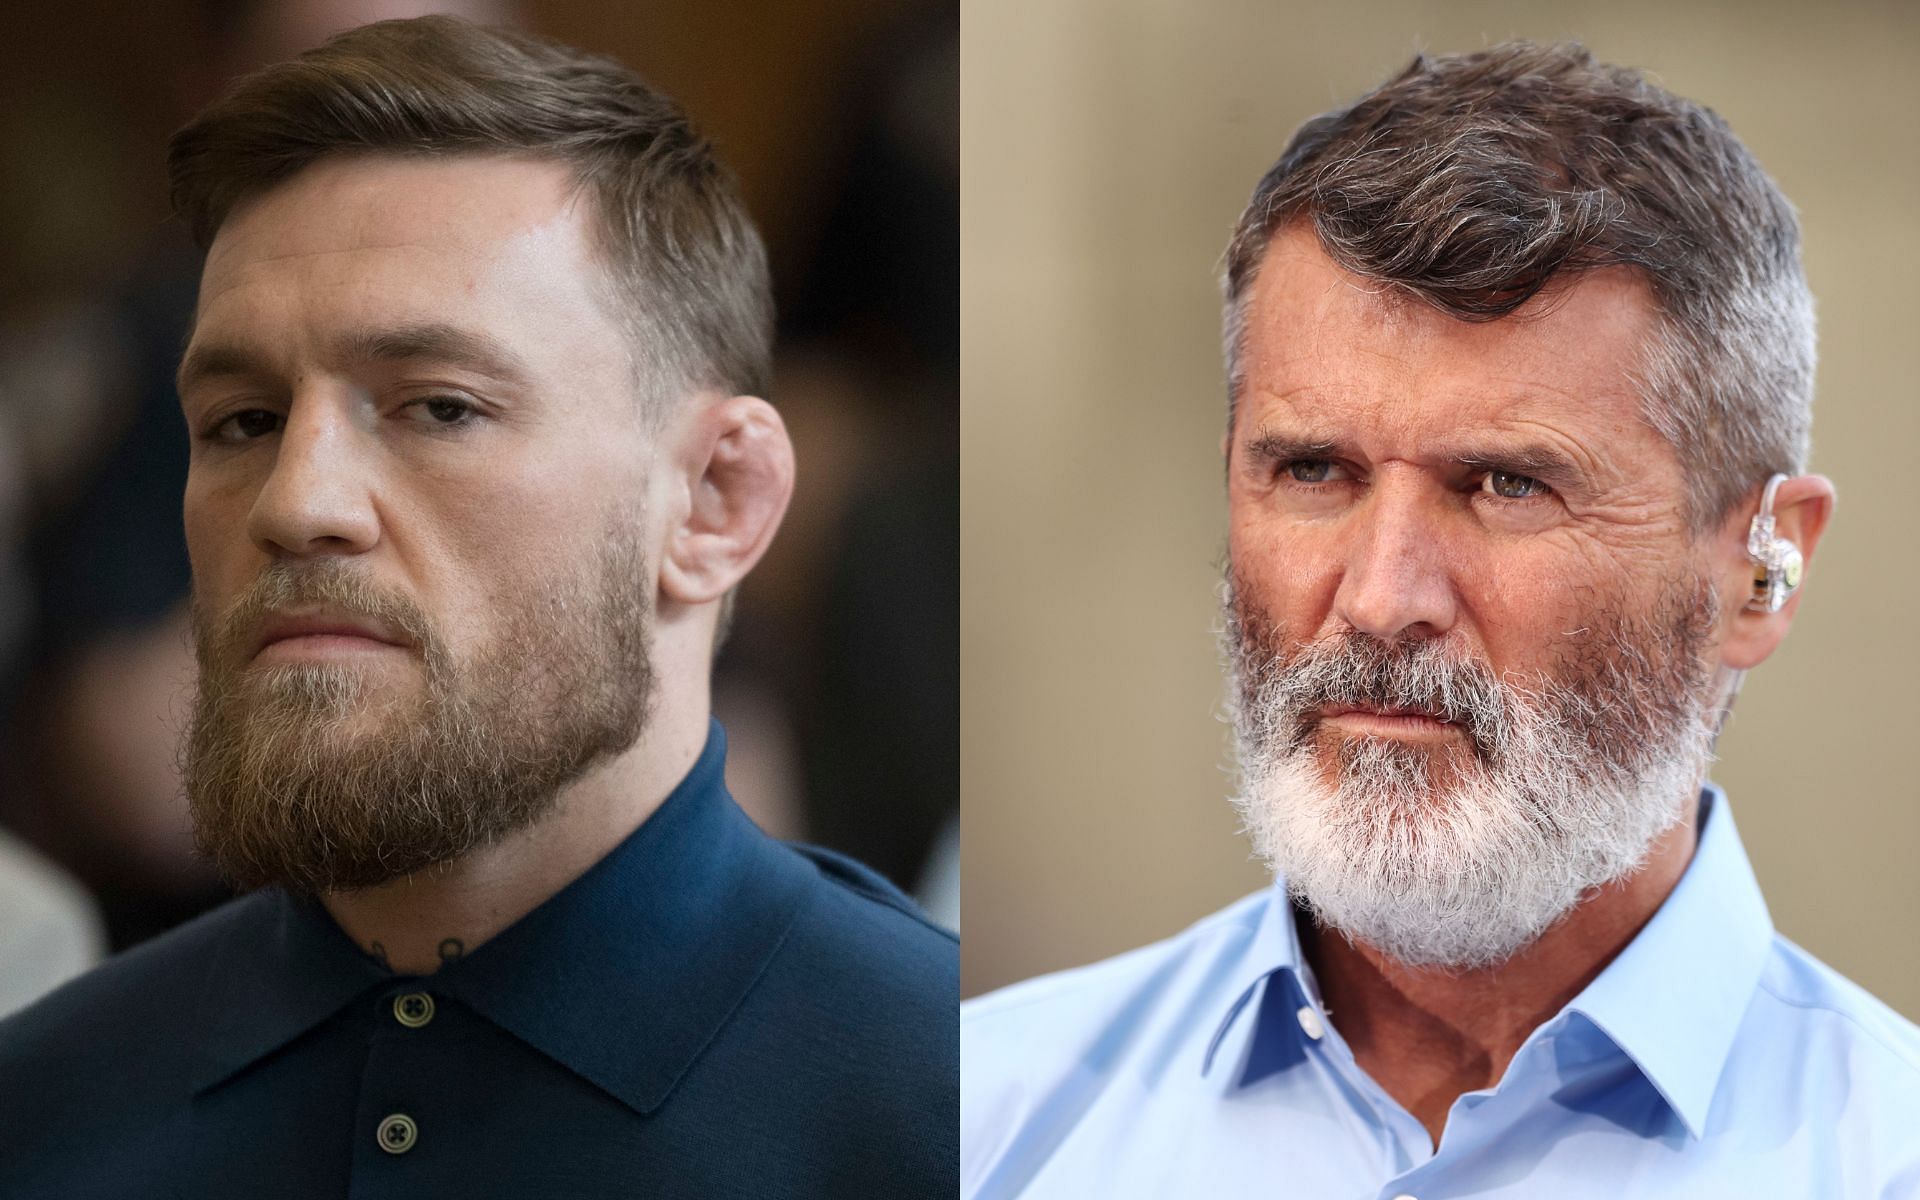 Conor McGregor (left) and Roy Keane (right). [via Getty Images]